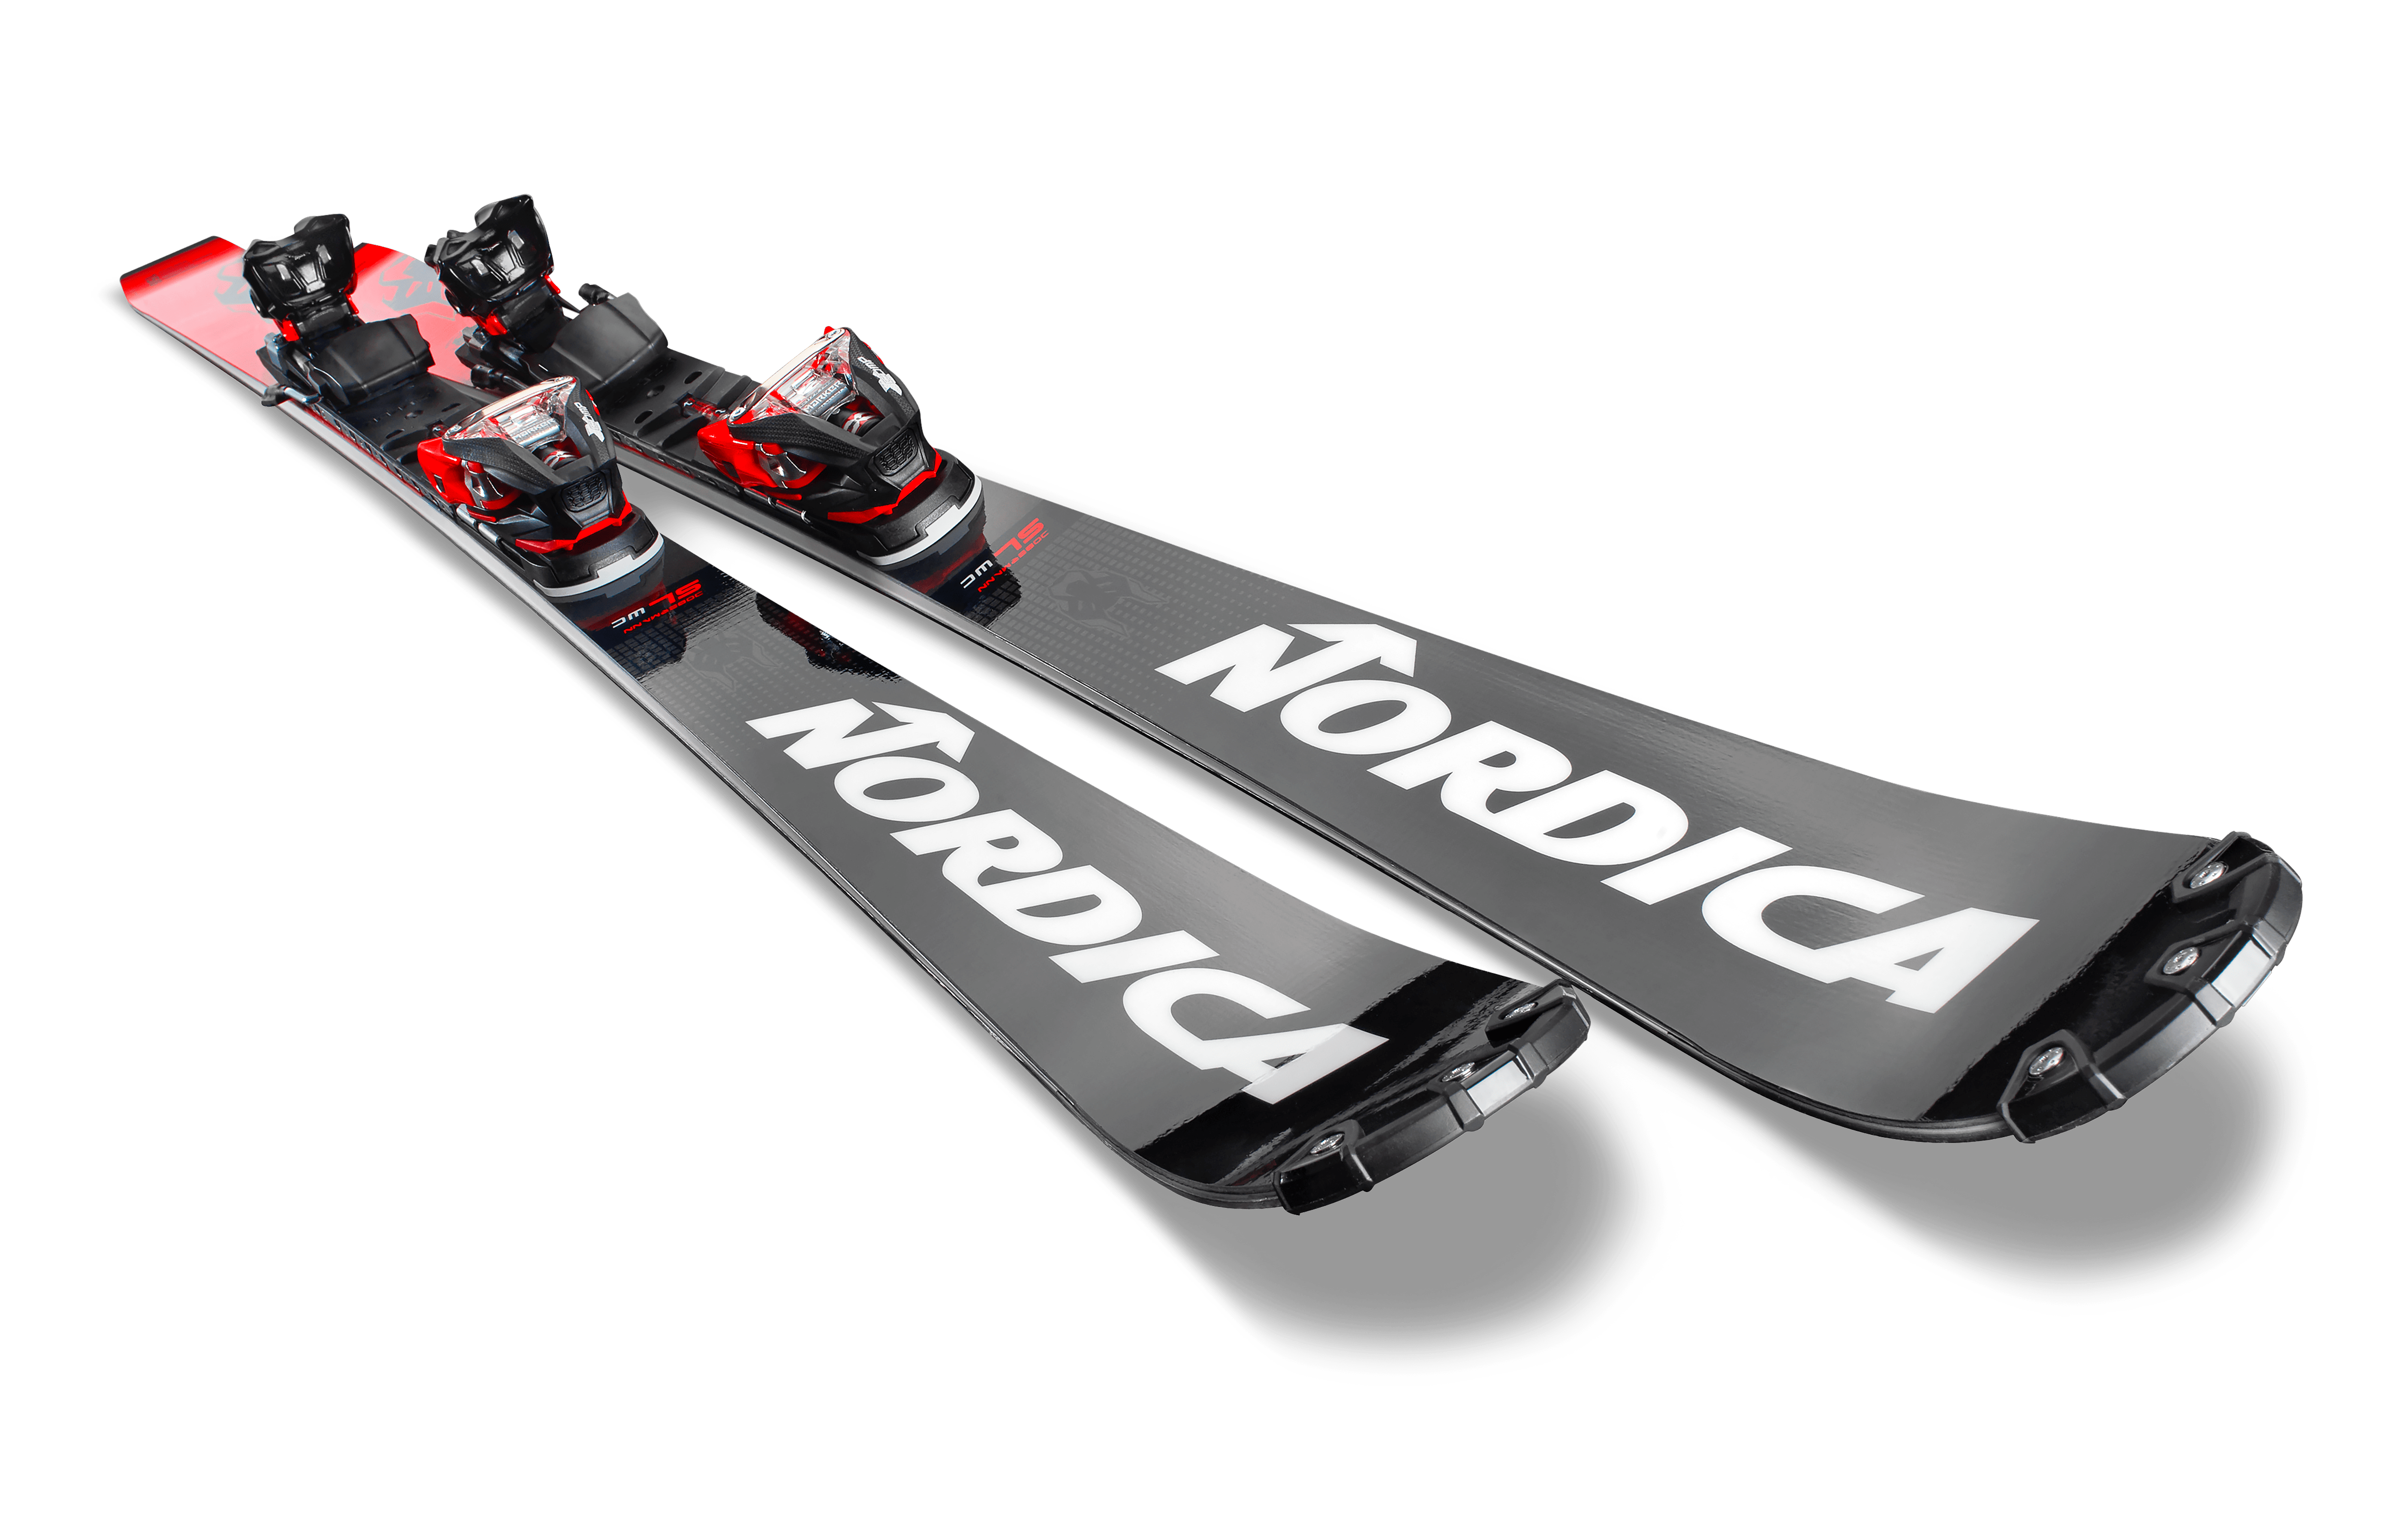 Picture of the Nordica Dobermann sl wc plate skis.